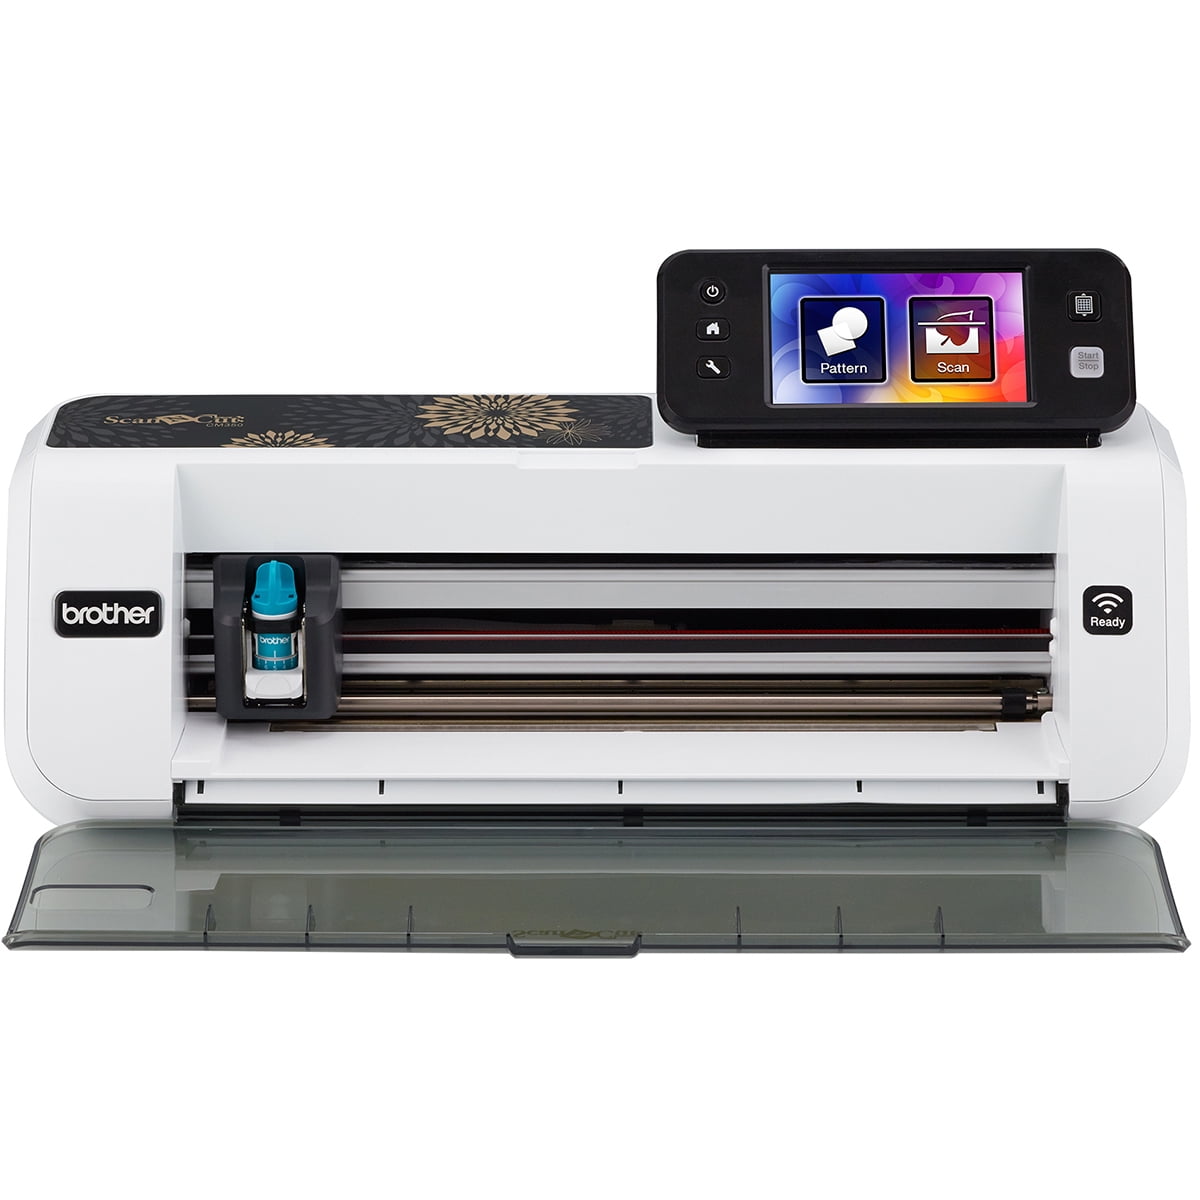 Brother ScanNCut2 CM350e Review: A cricut machine with a built-in scanner